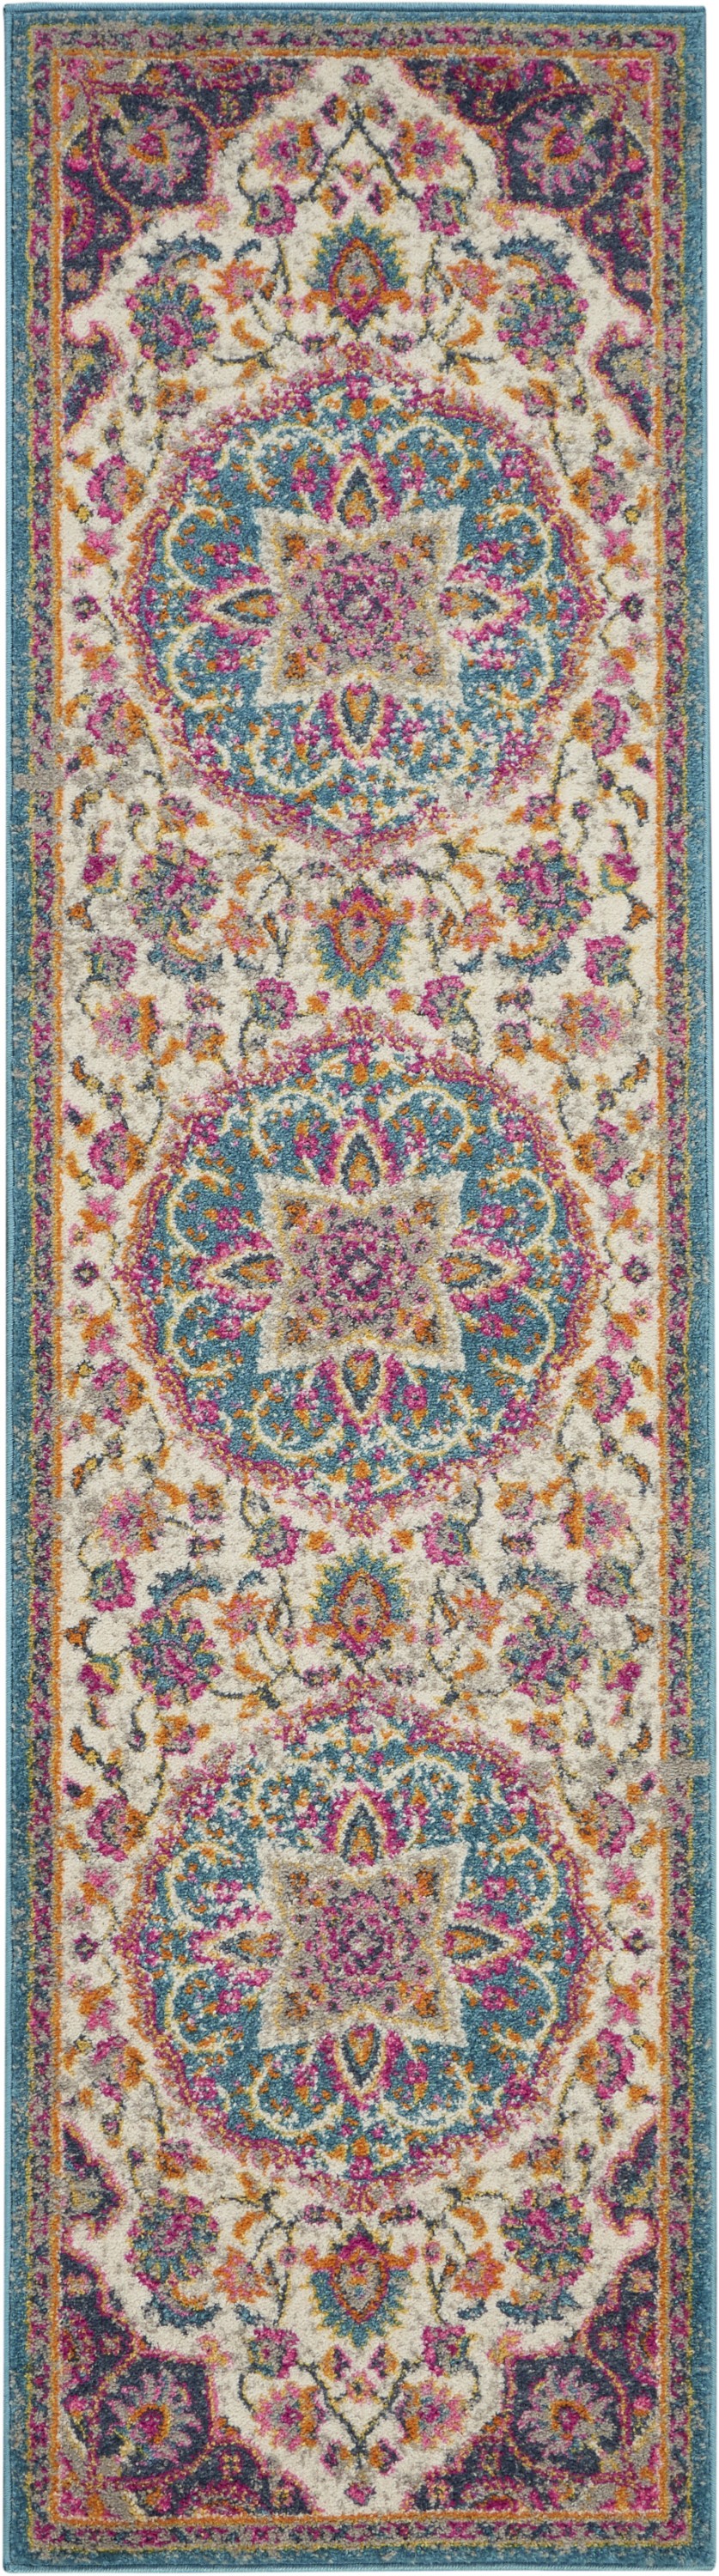 8' Pink And Green Dhurrie Runner Rug-385528-1